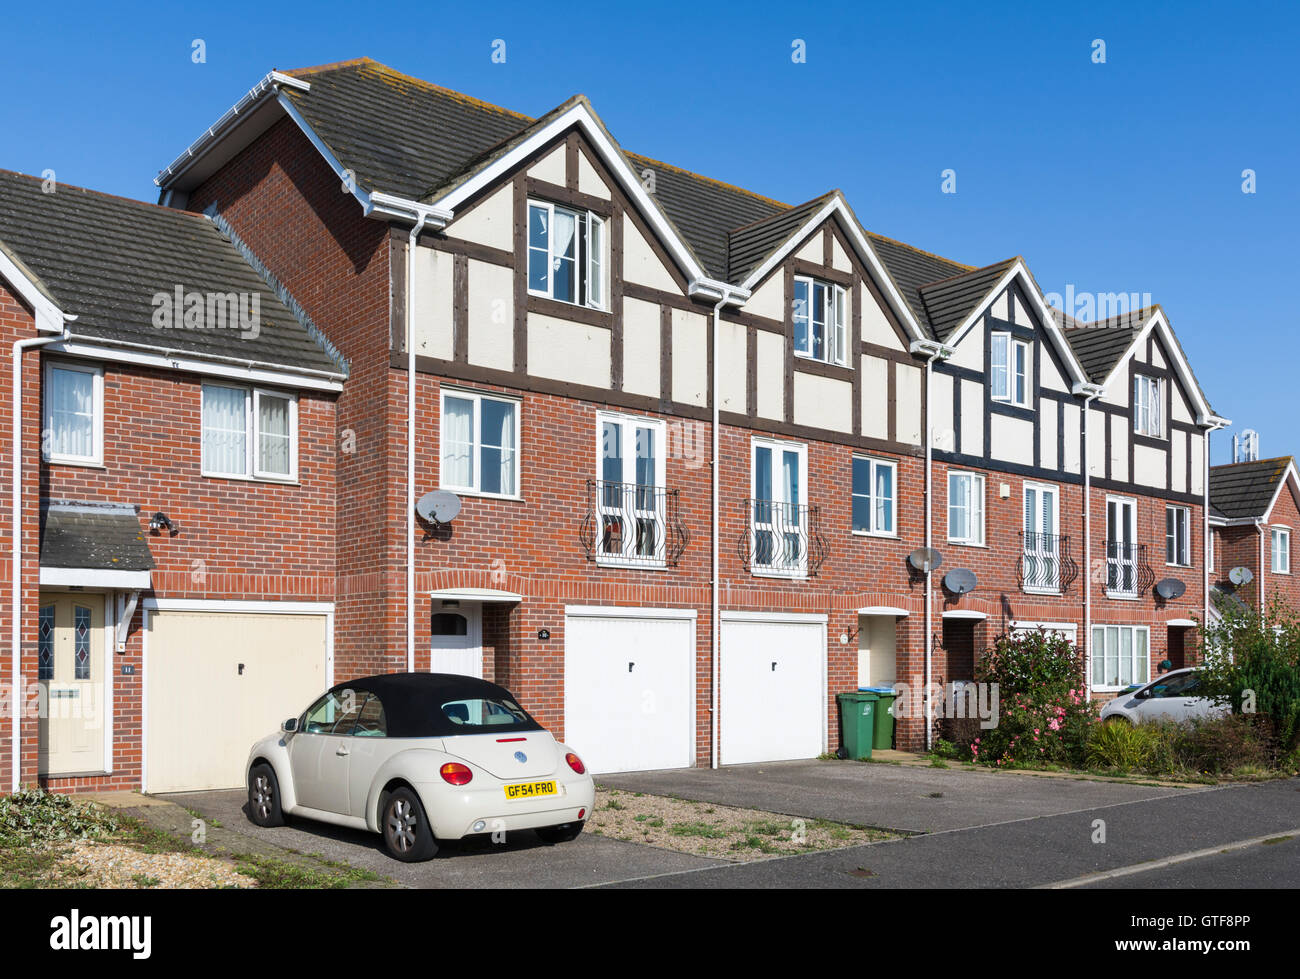 Terrace of townhouses in a town in the UK. Stock Photo